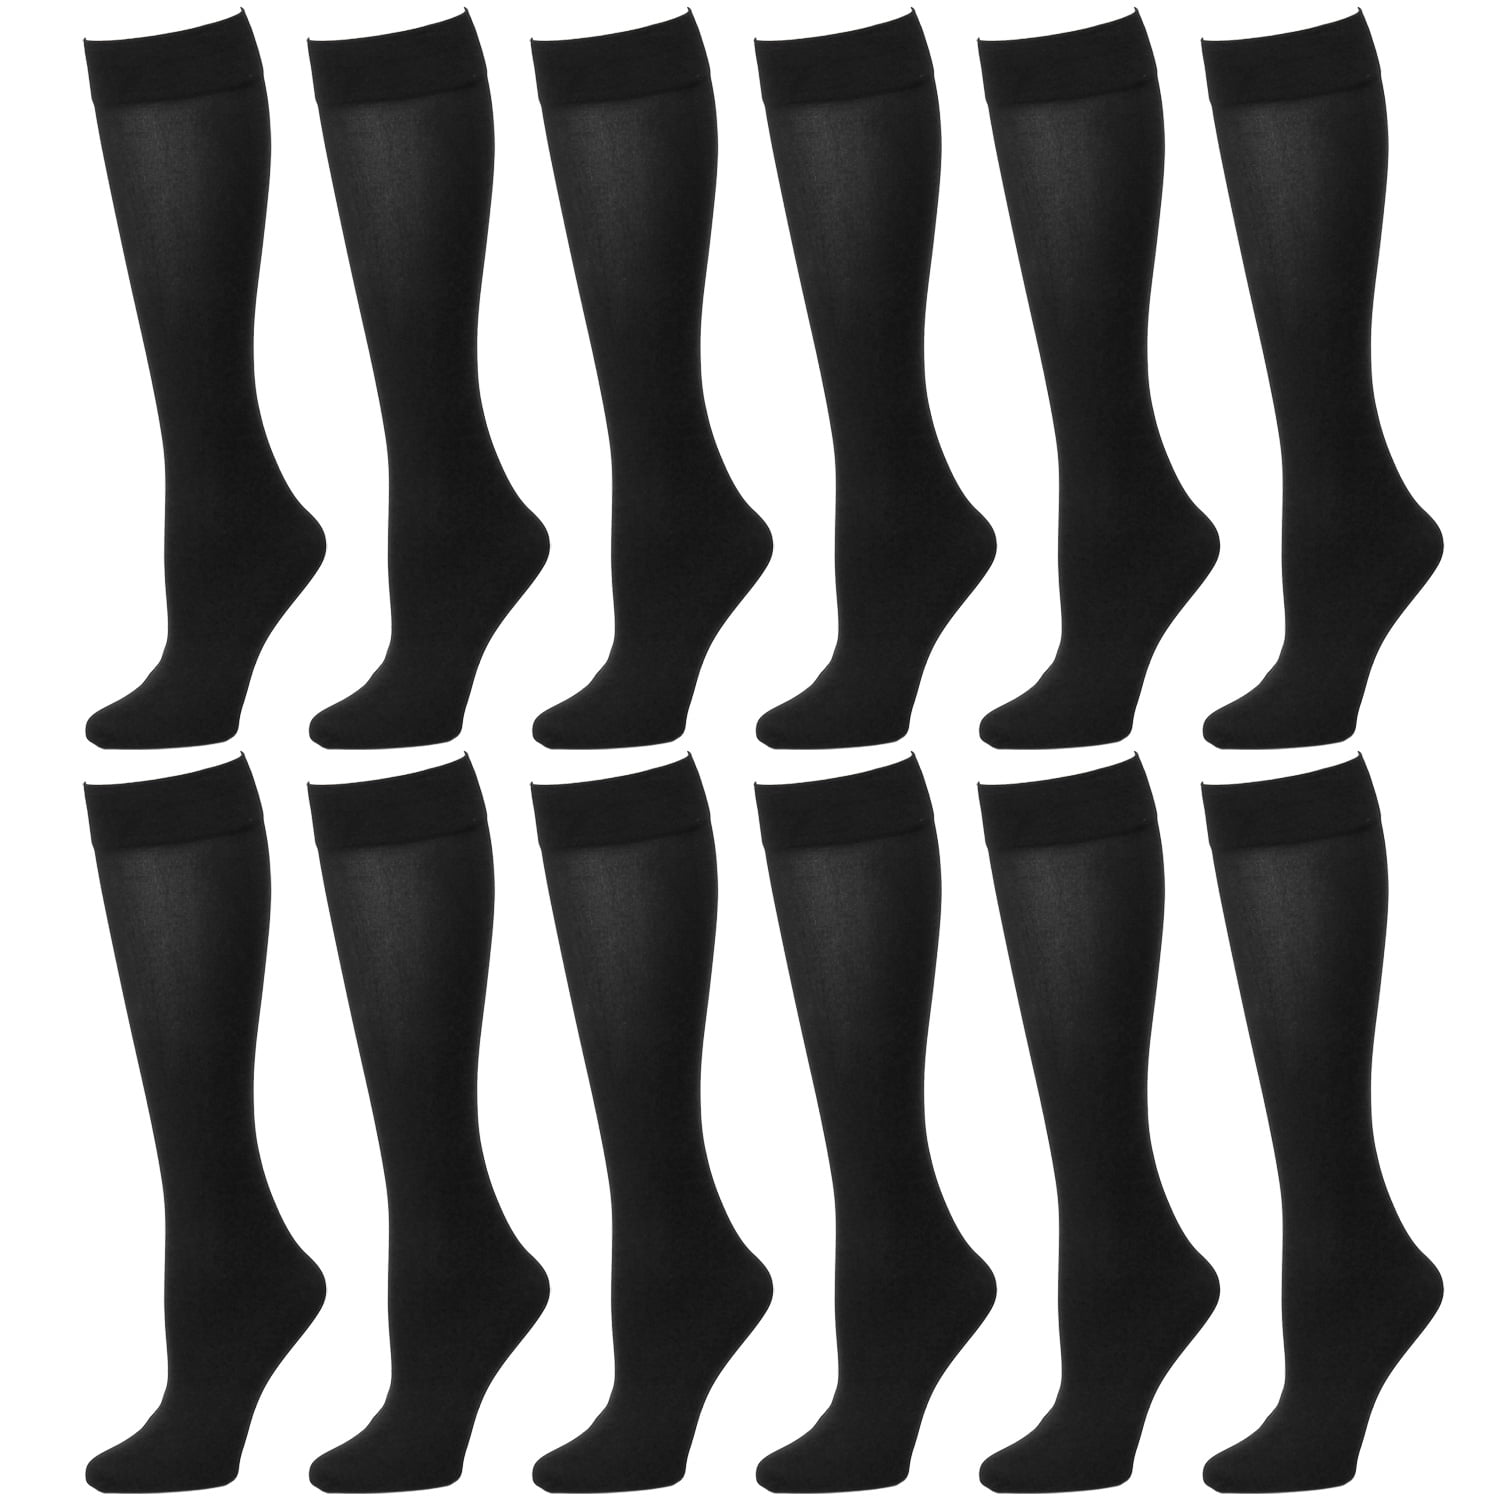 12 Pairs Women Trouser Socks with Comfort Band Stretchy Spandex Opaque ...